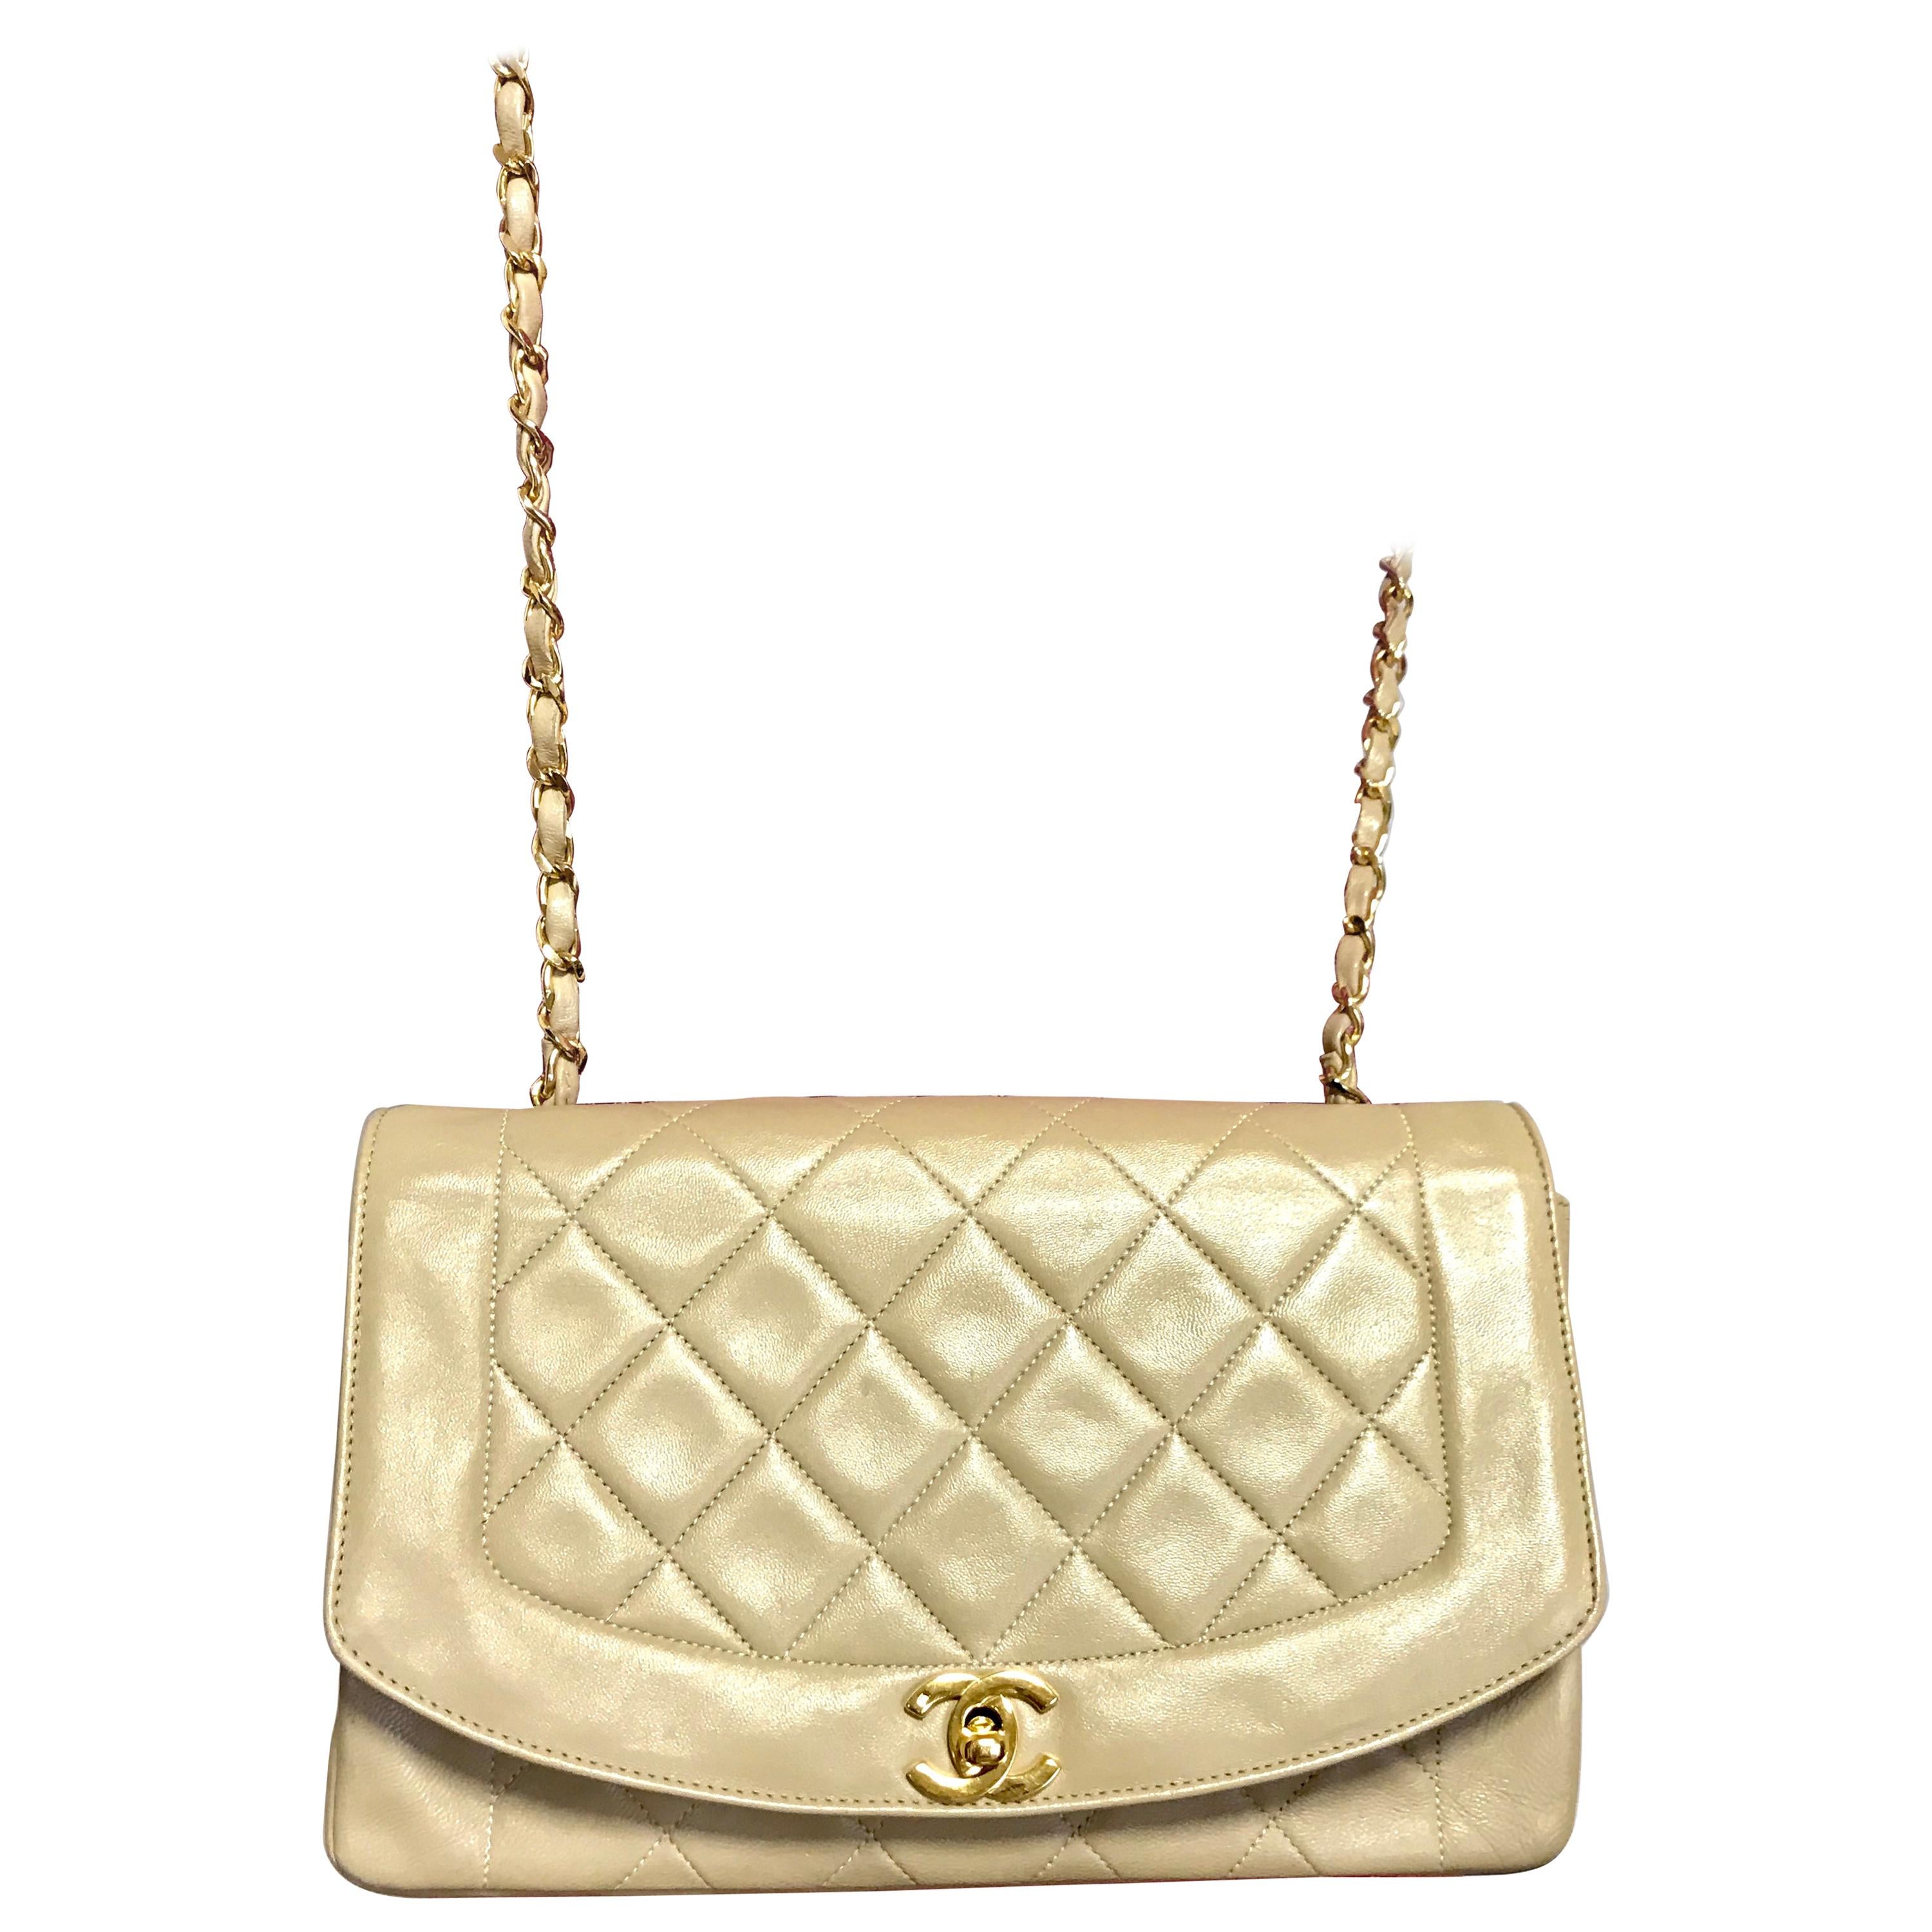 1990s. Vintage Chanel beige lamb leather classic 2.55 flap chain shoulder bag, Diana purse with gold tone CC closure.

Good vintage condition!

Introducing one of the most popular pieces from CHANEL back in the era, vintage Chanel classic beige lamb